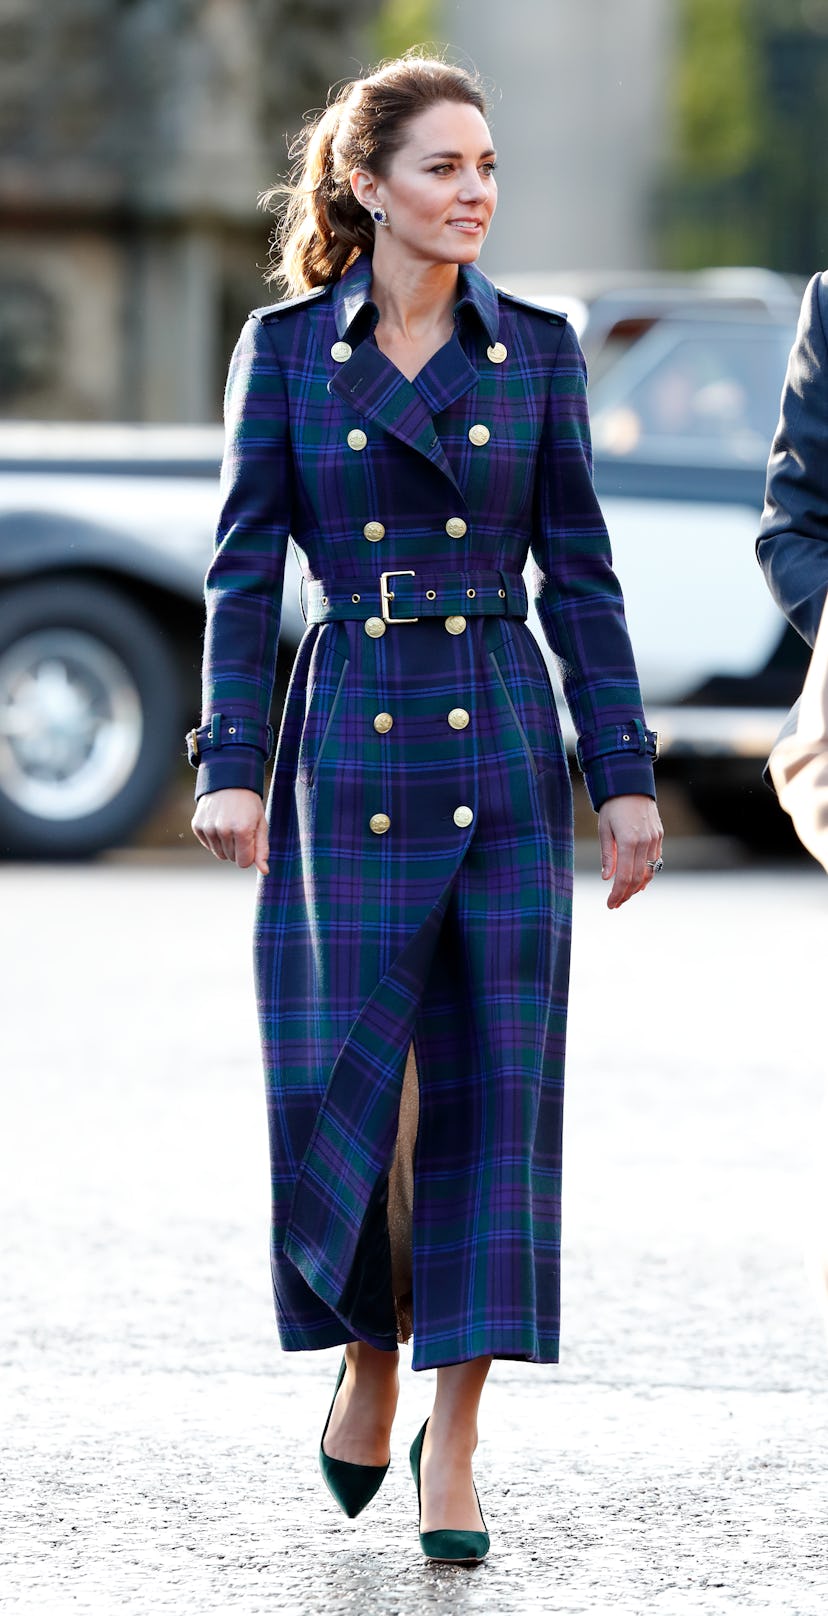 Kate Middleton's outfits for winter run the gamut from camel tones to tweed coats.